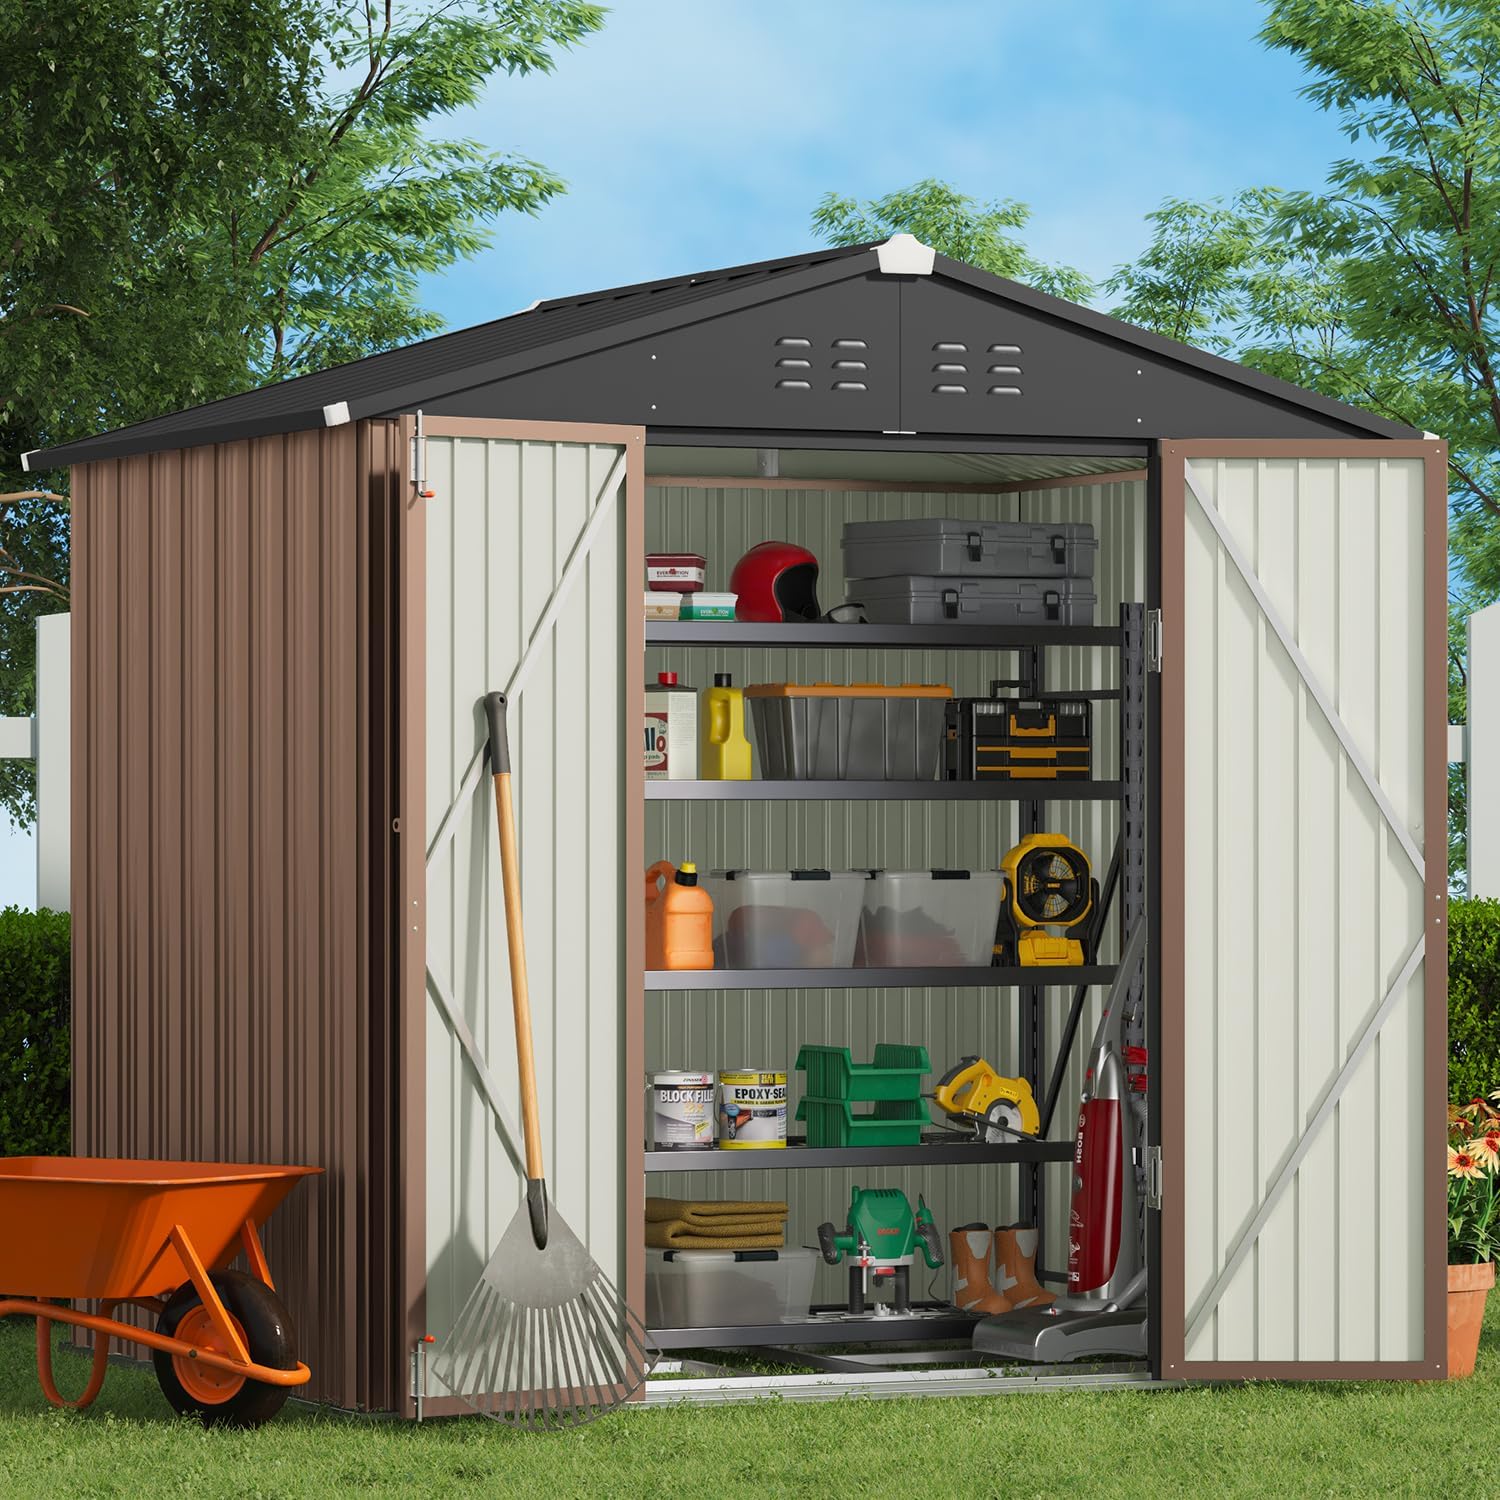 Gizoon Outdoor Storage Shed 8 x 6 FT with Metal Base [...]